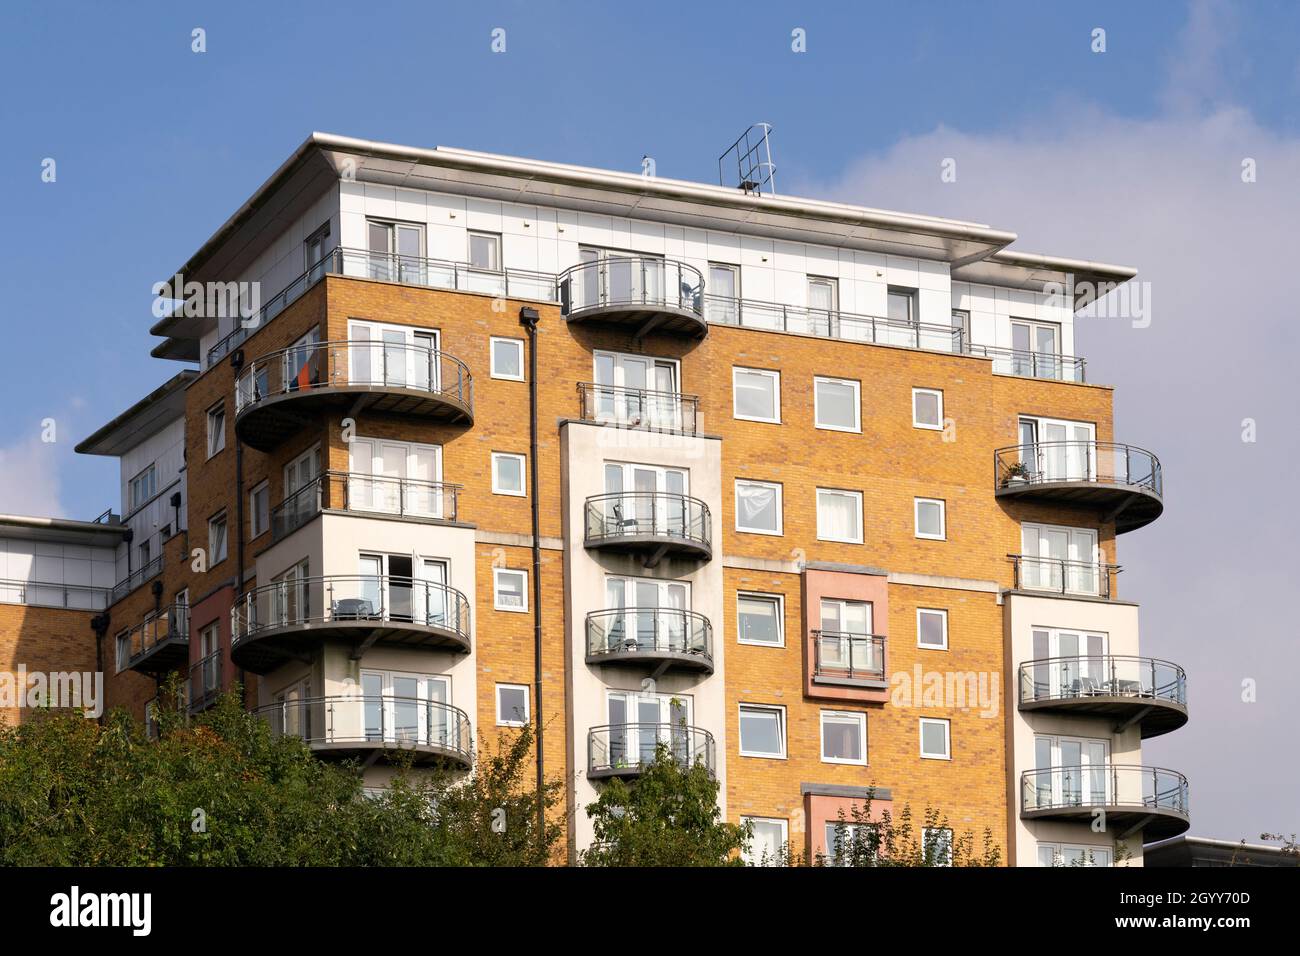 Blocks of flats in Winterthur Way needing aluminium composite cladding and wooden balcony decking to be replaced over fire risk fears. Basingstoke, UK Stock Photo